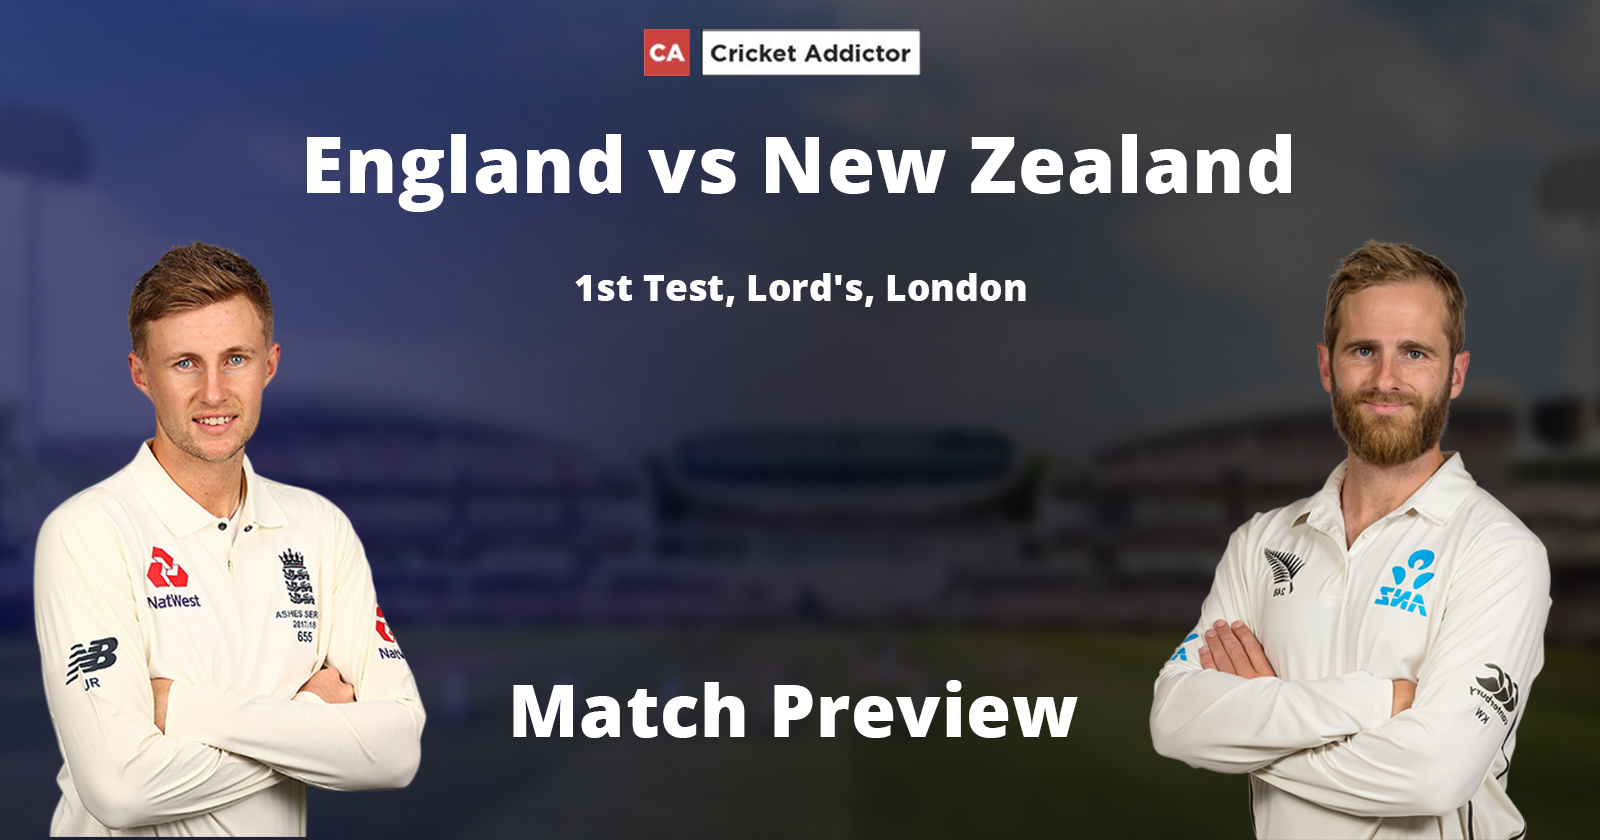 England vs New Zealand 2021- First Test Match Preview